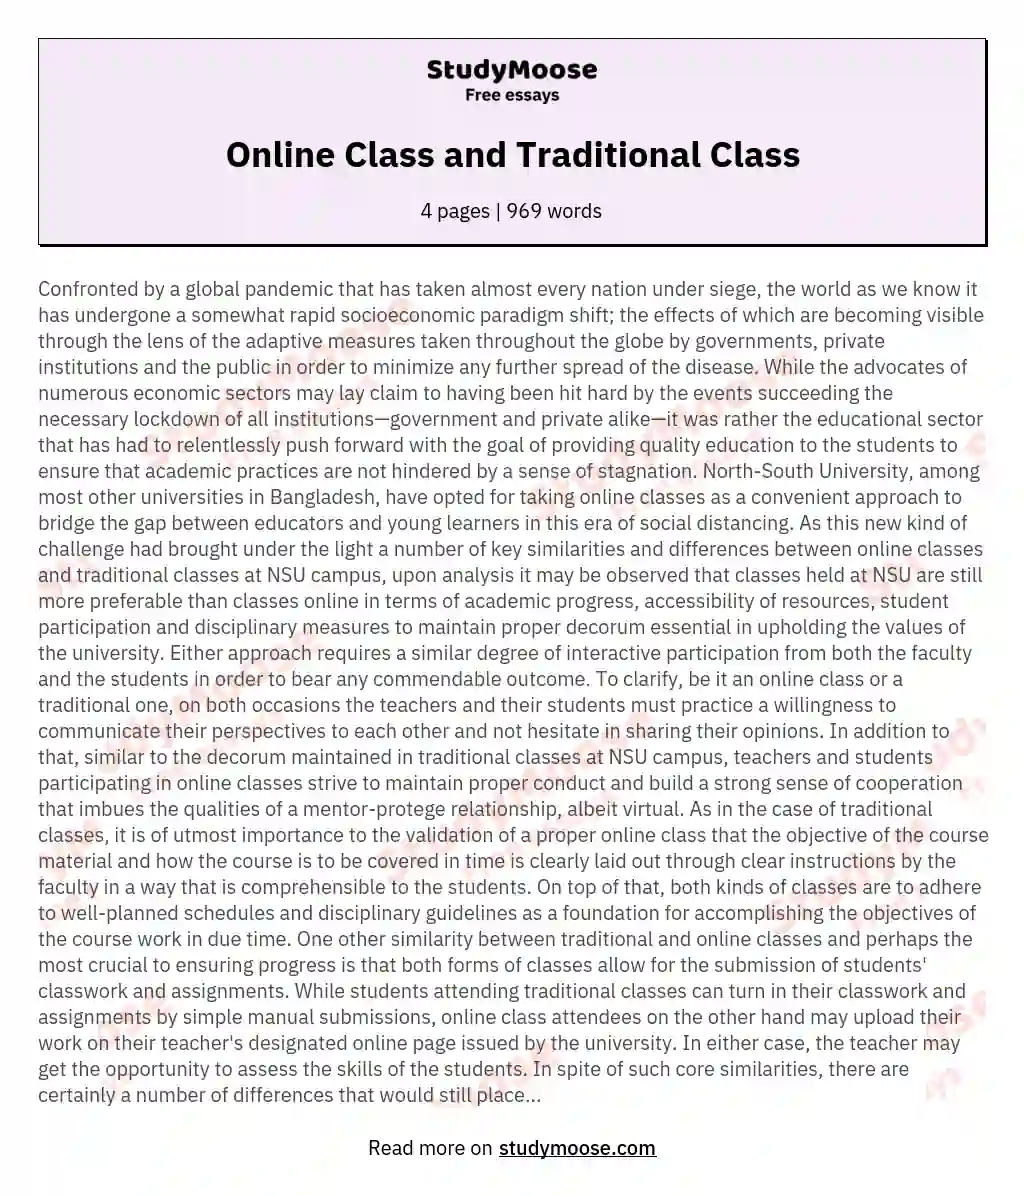 Online Class and Traditional Class